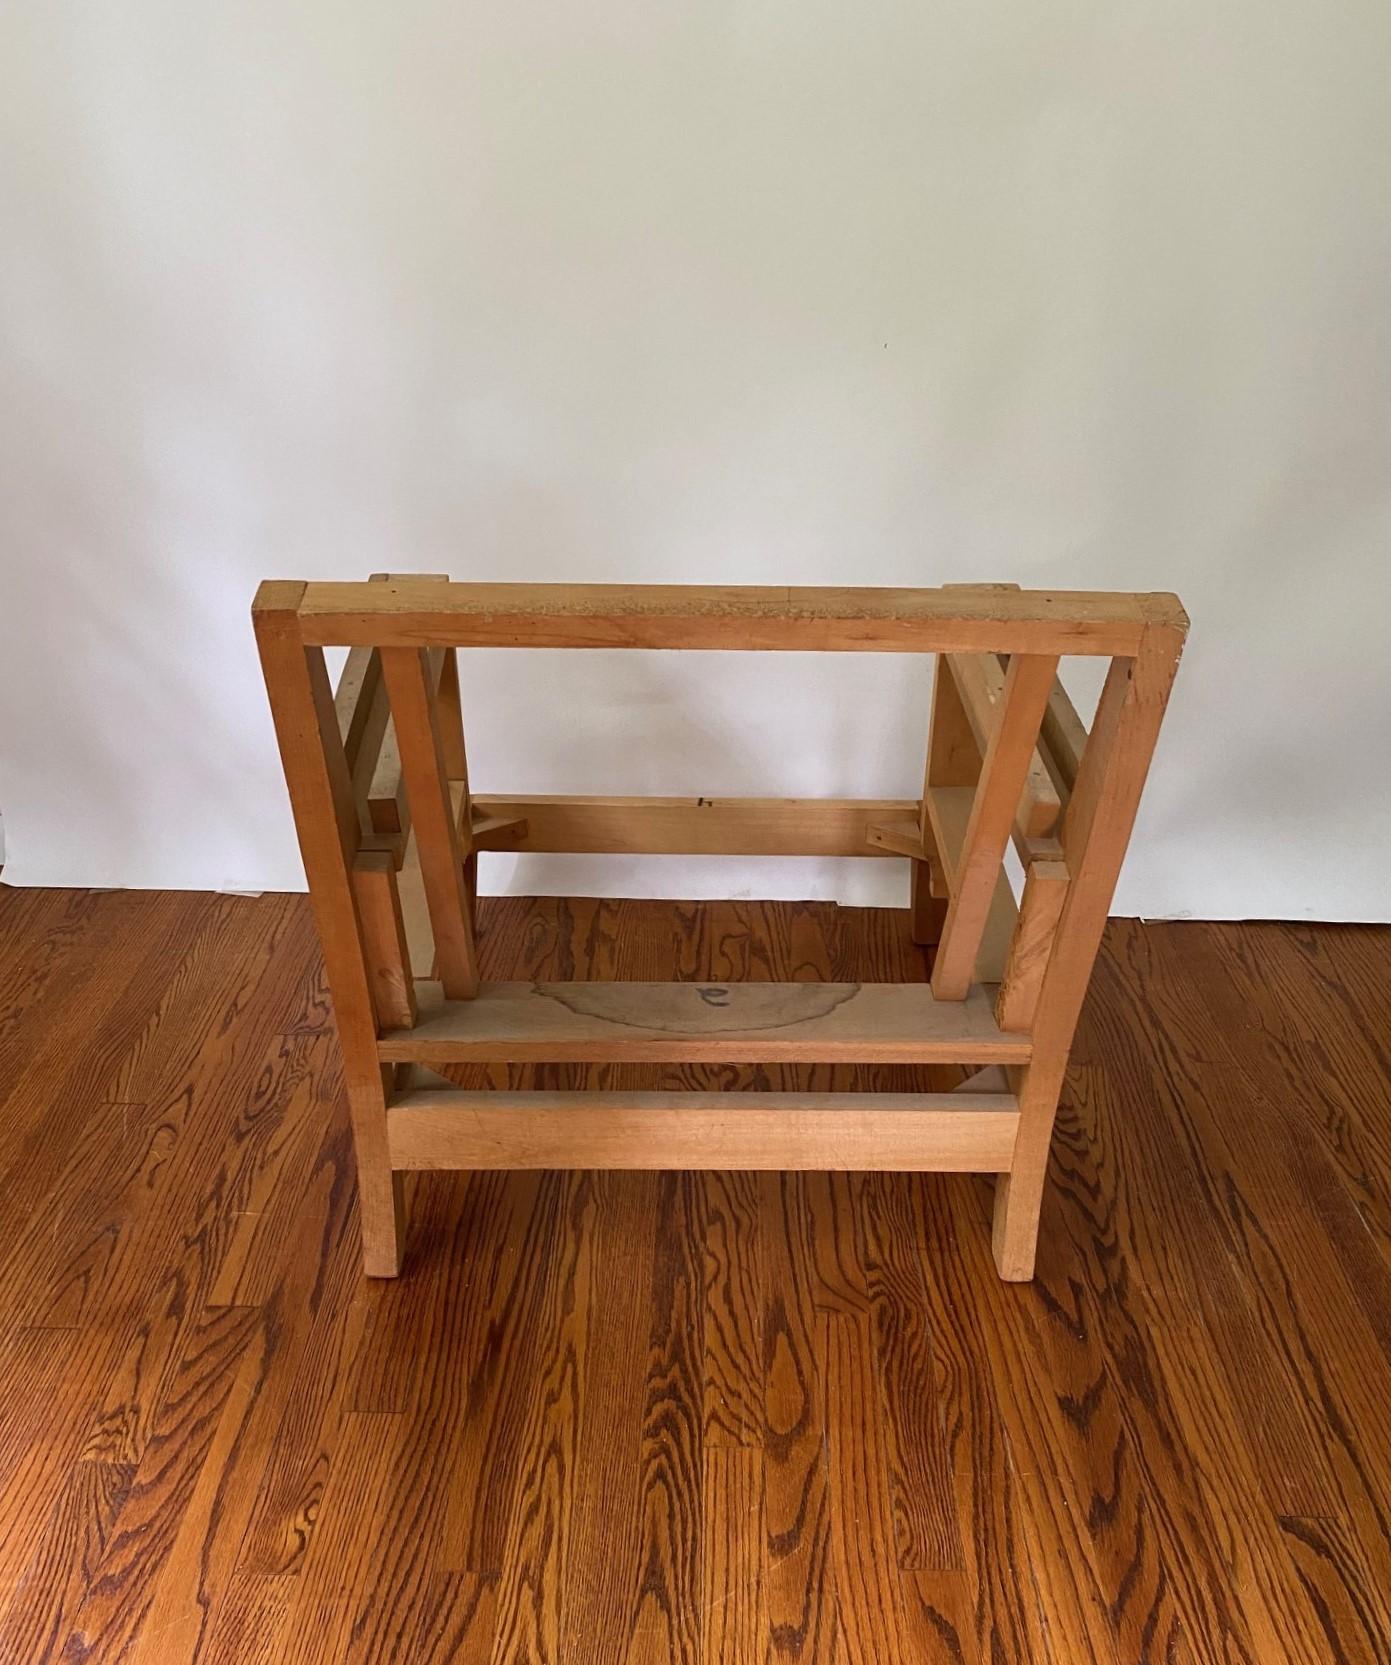 New Kiln-Dried Maple Lawson Style Lounge Chair Frame with Mahogany Legs. In Excellent Condition For Sale In North Salem, NY